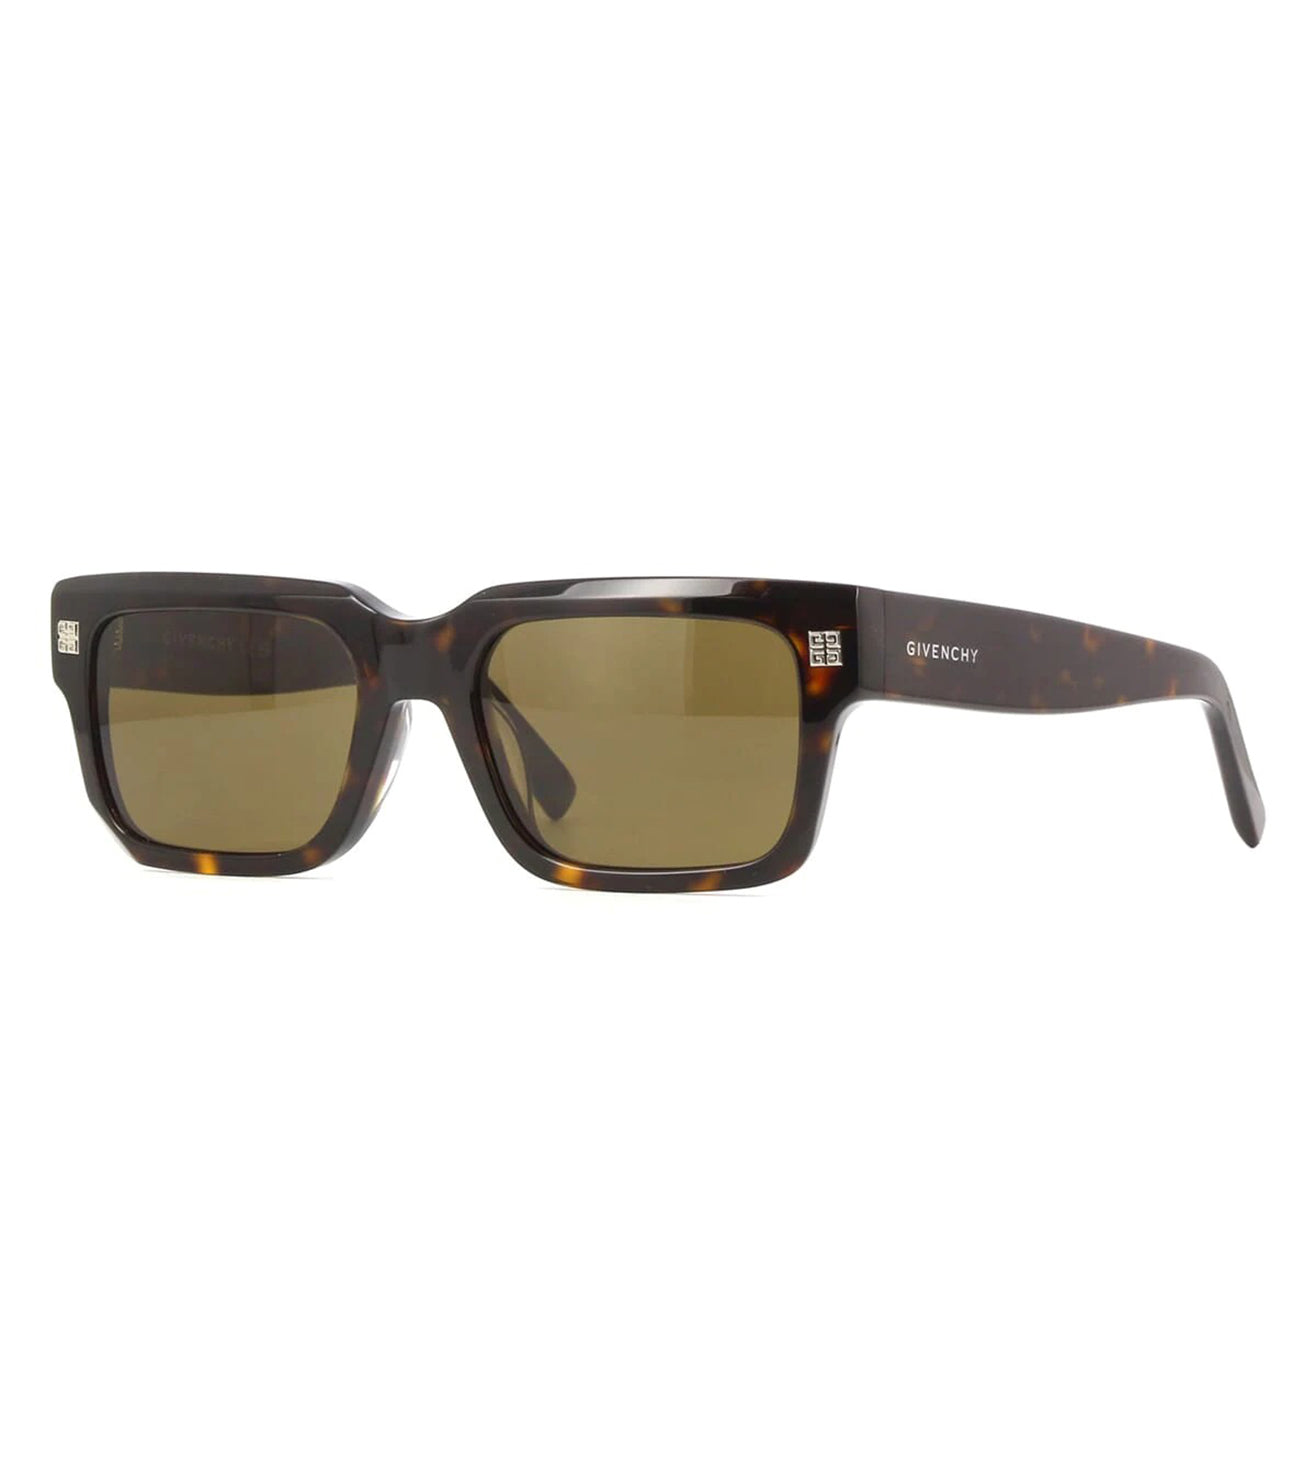 Givenchy Unisex Brown Square Sunglasses